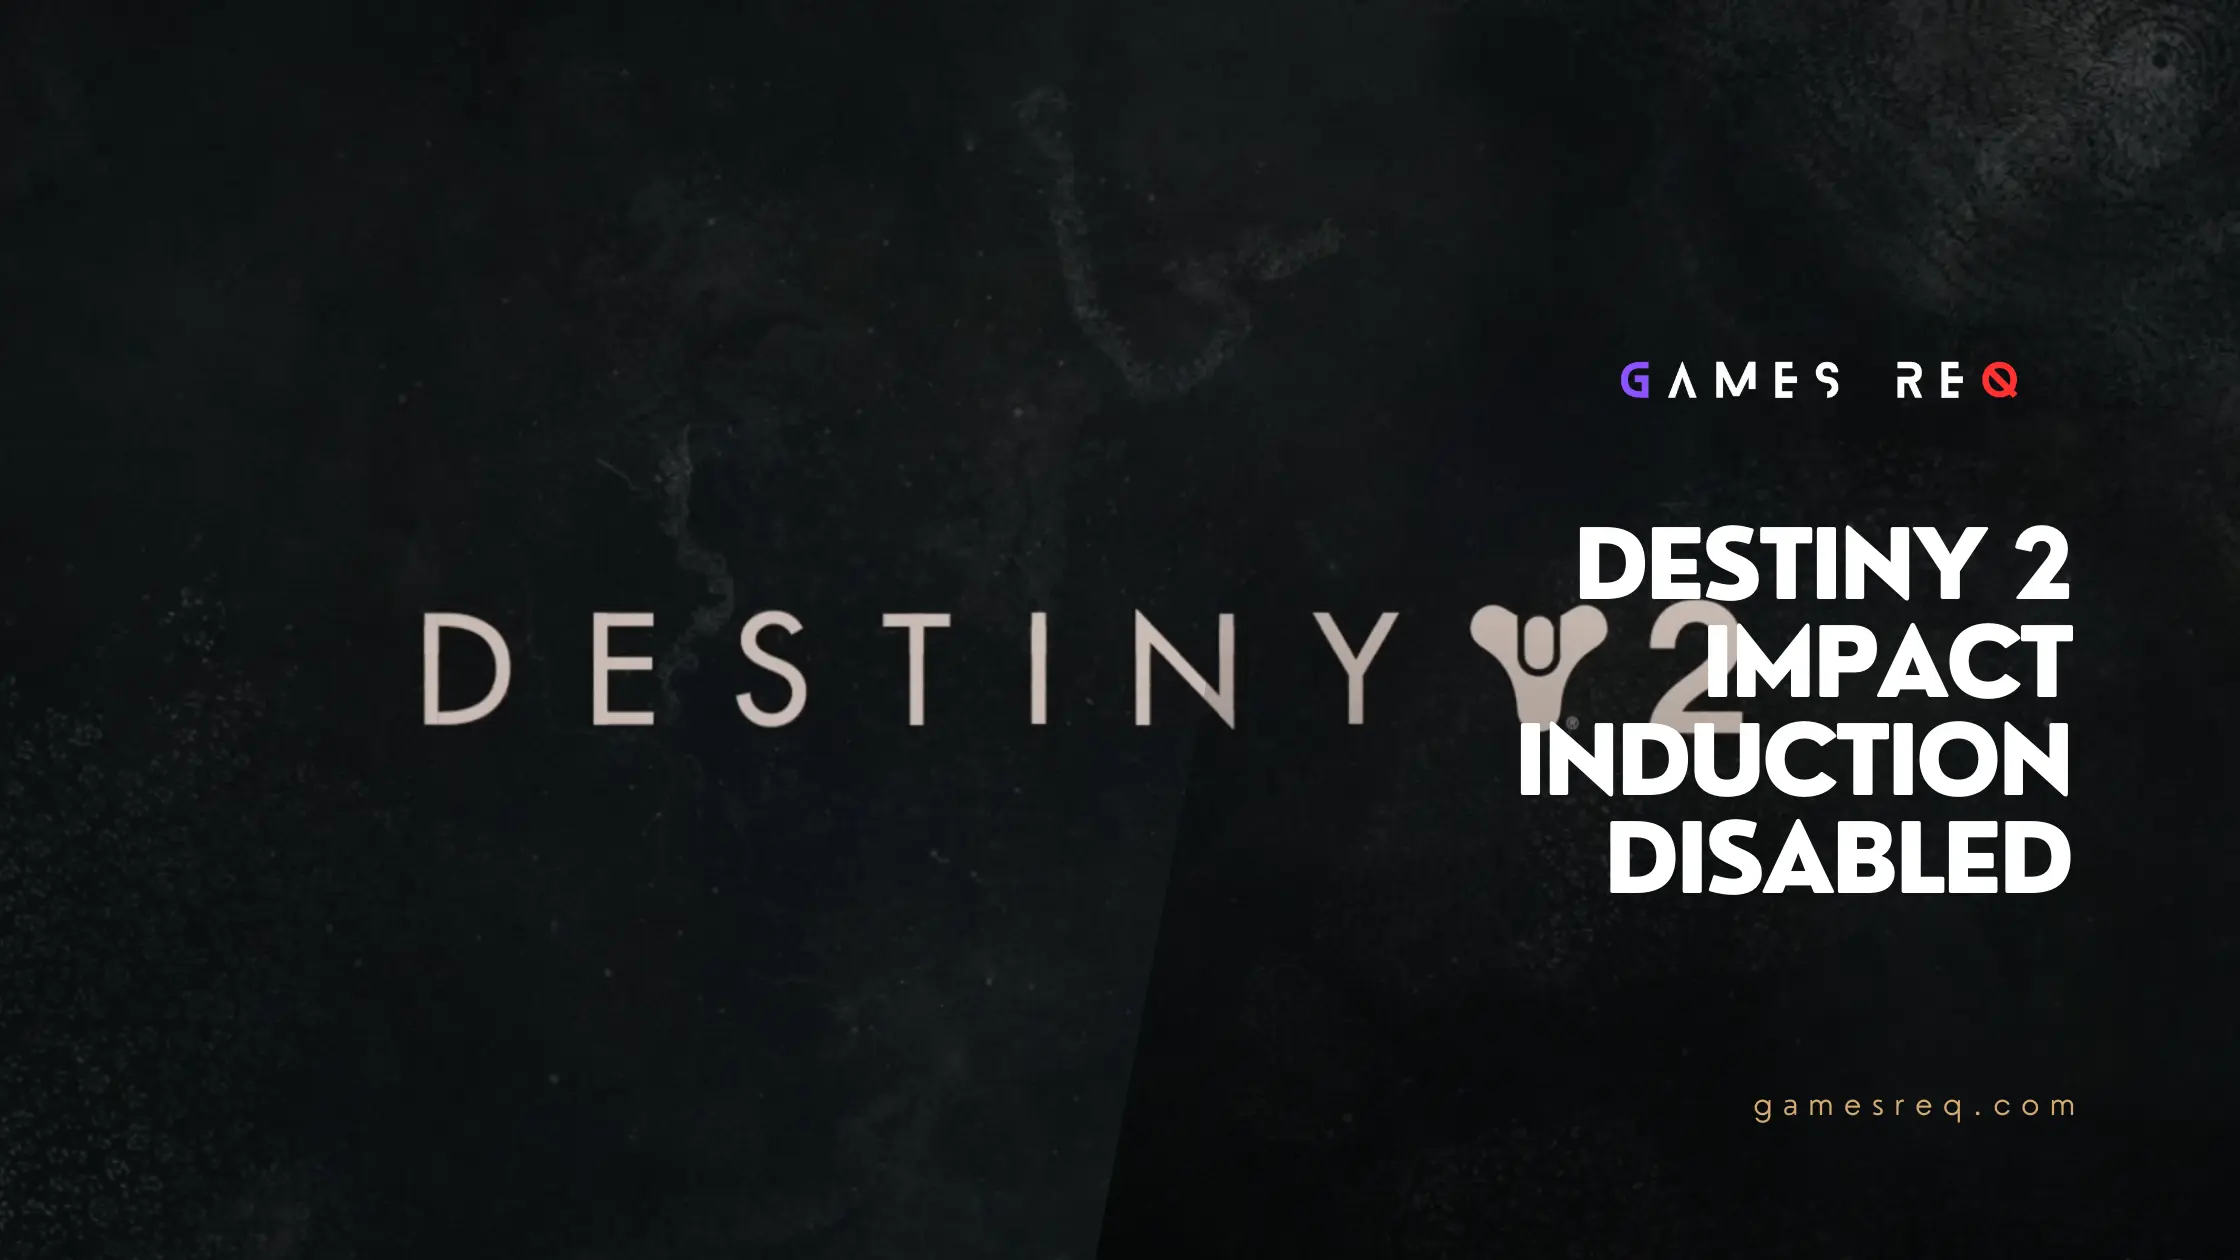 Destiny 2 Impact Induction Disabled Bungie Disables Crucial Mods Due to Game Breaking Bug 2023